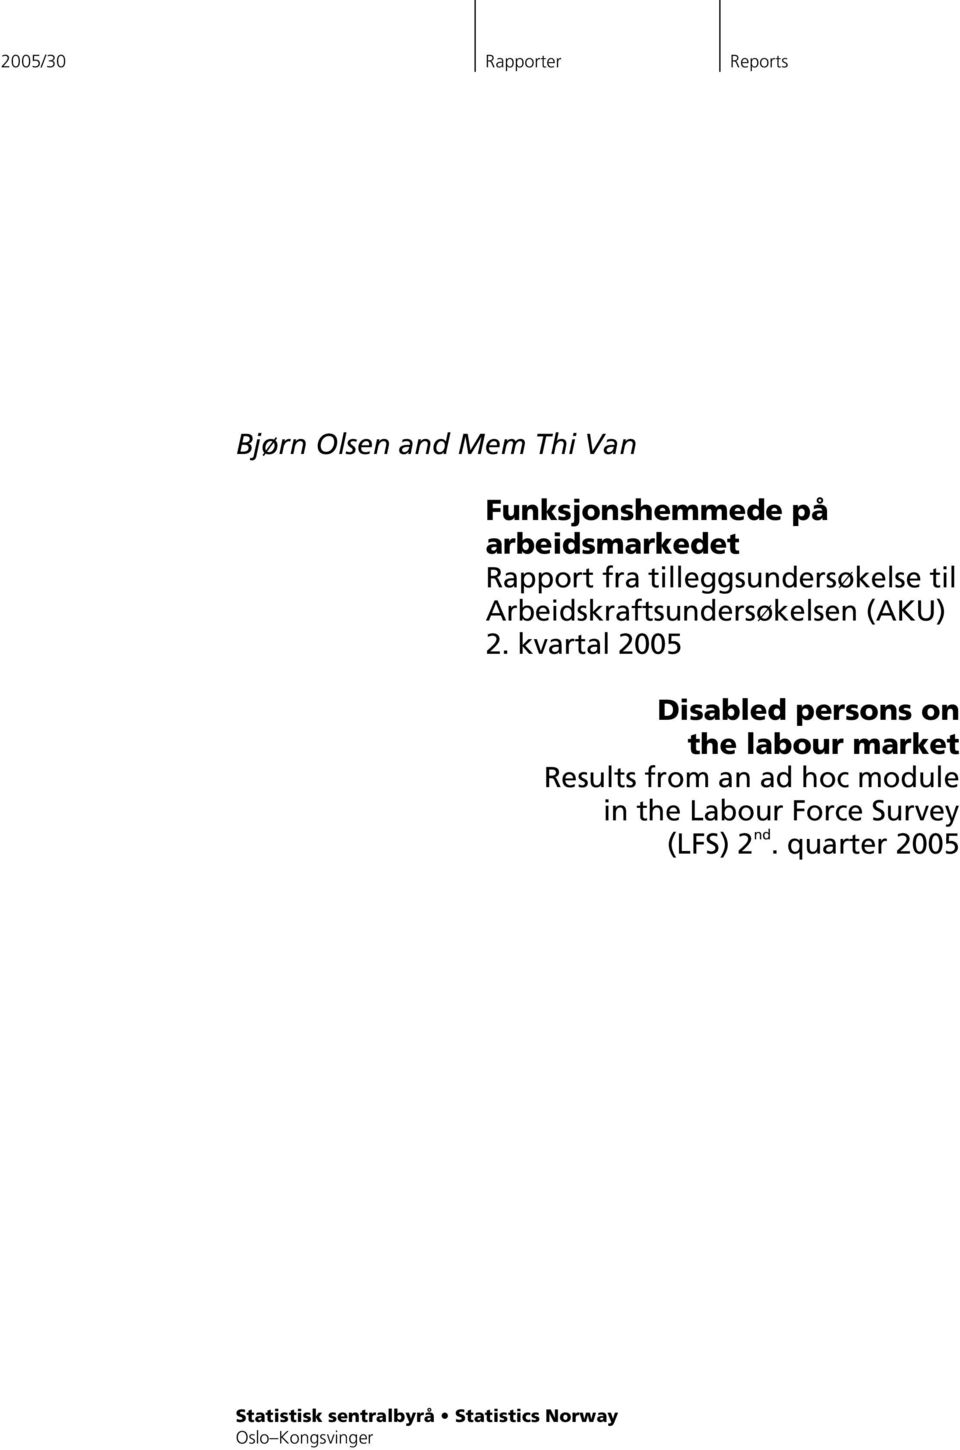 kvartal 2005 Disabled persons on the labour market Results from an ad hoc module in the